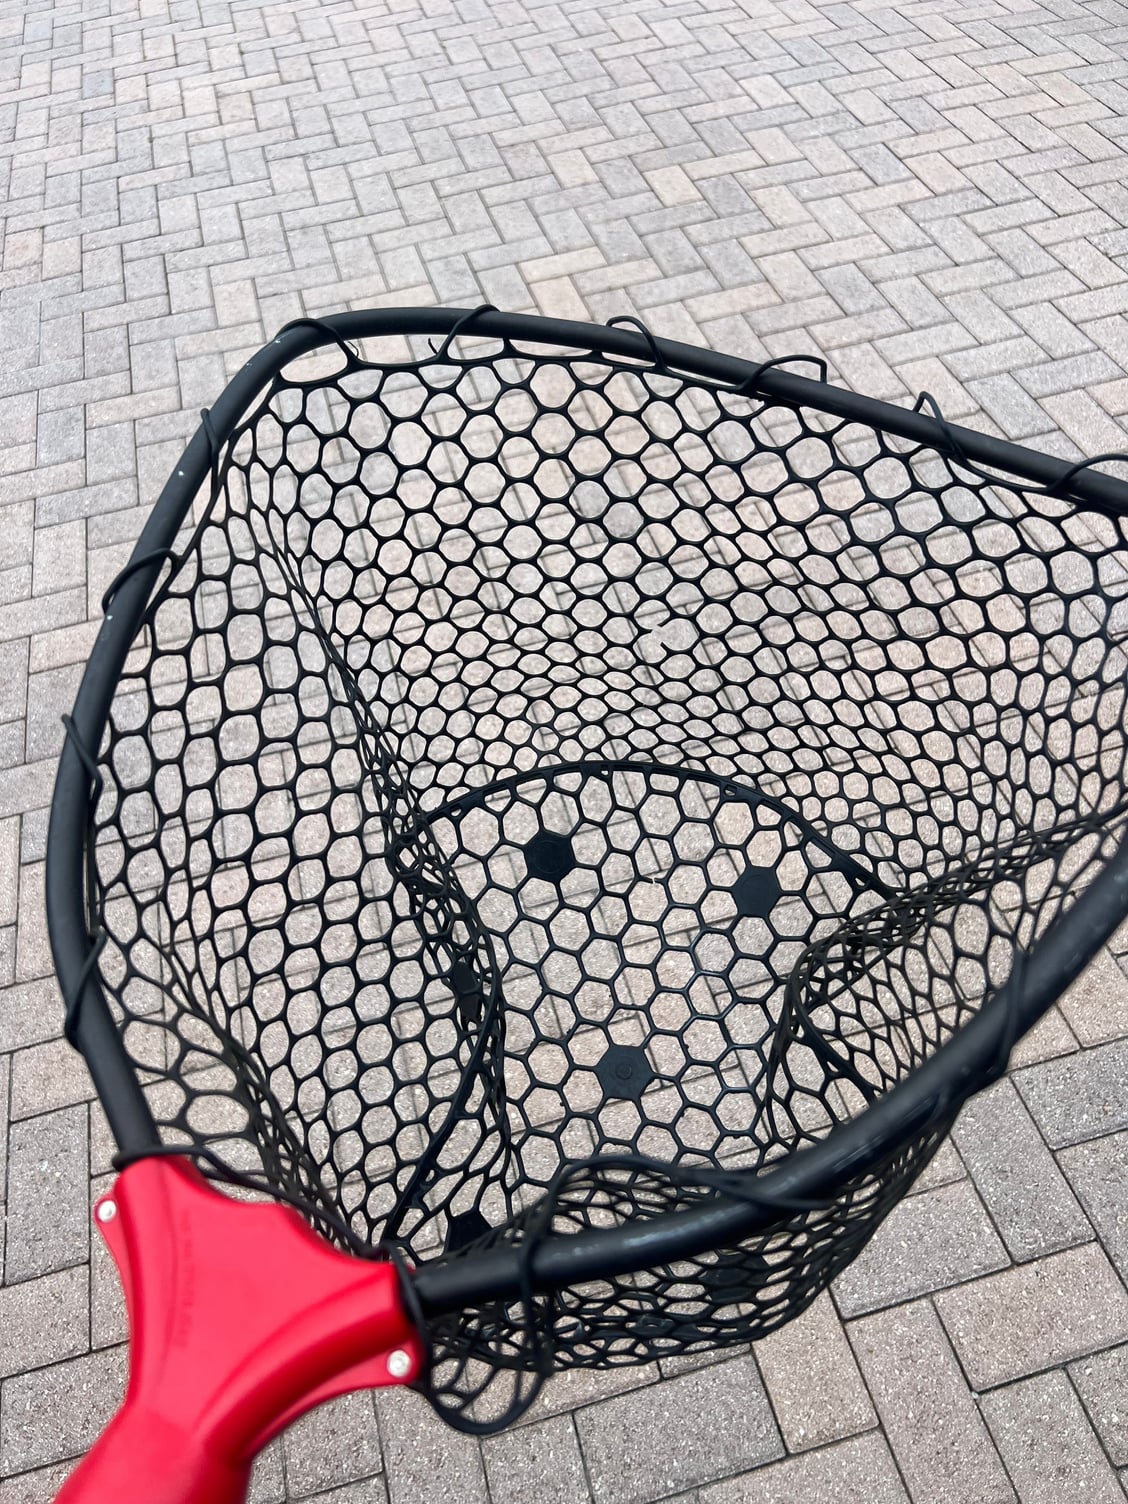 EGO S2 Slider Net w/Rubber netting. Extends to 60” good condition